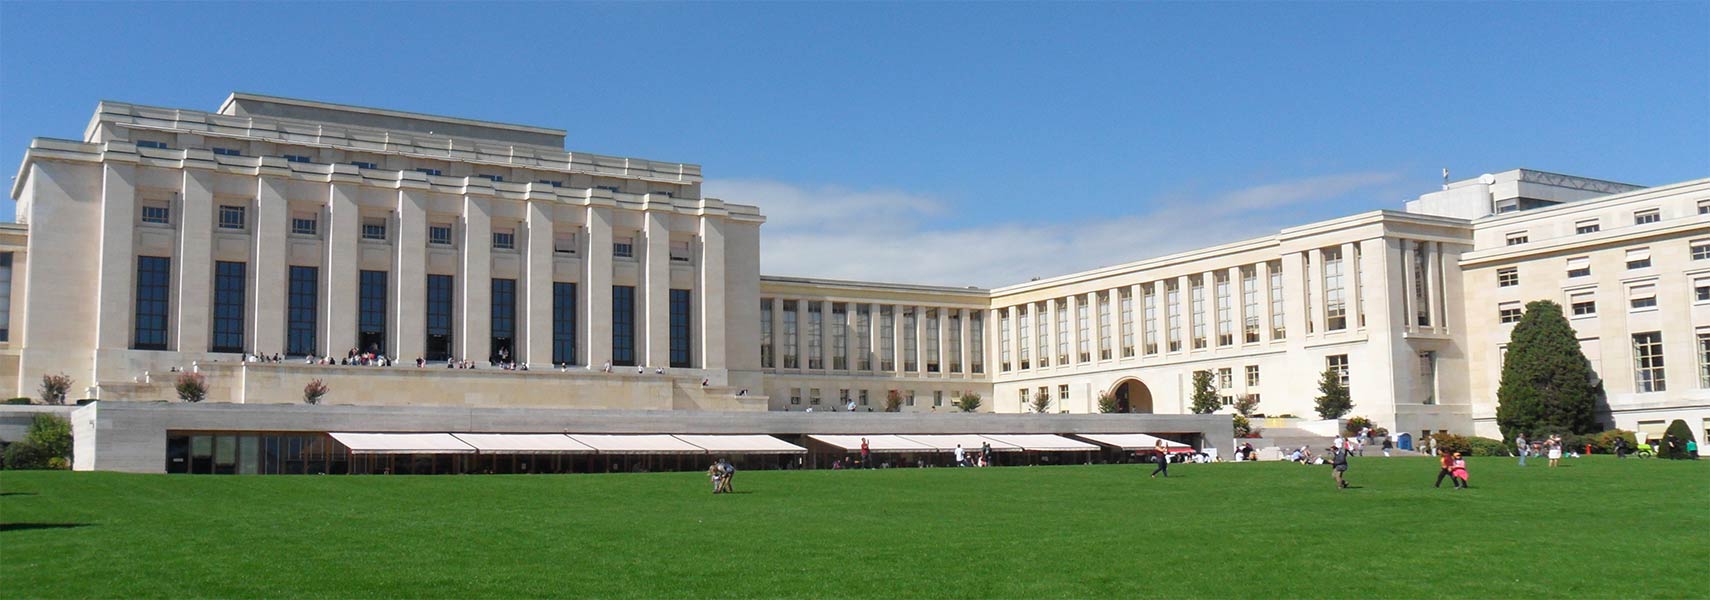 Palace of Nations, the United Nations Office at Geneva